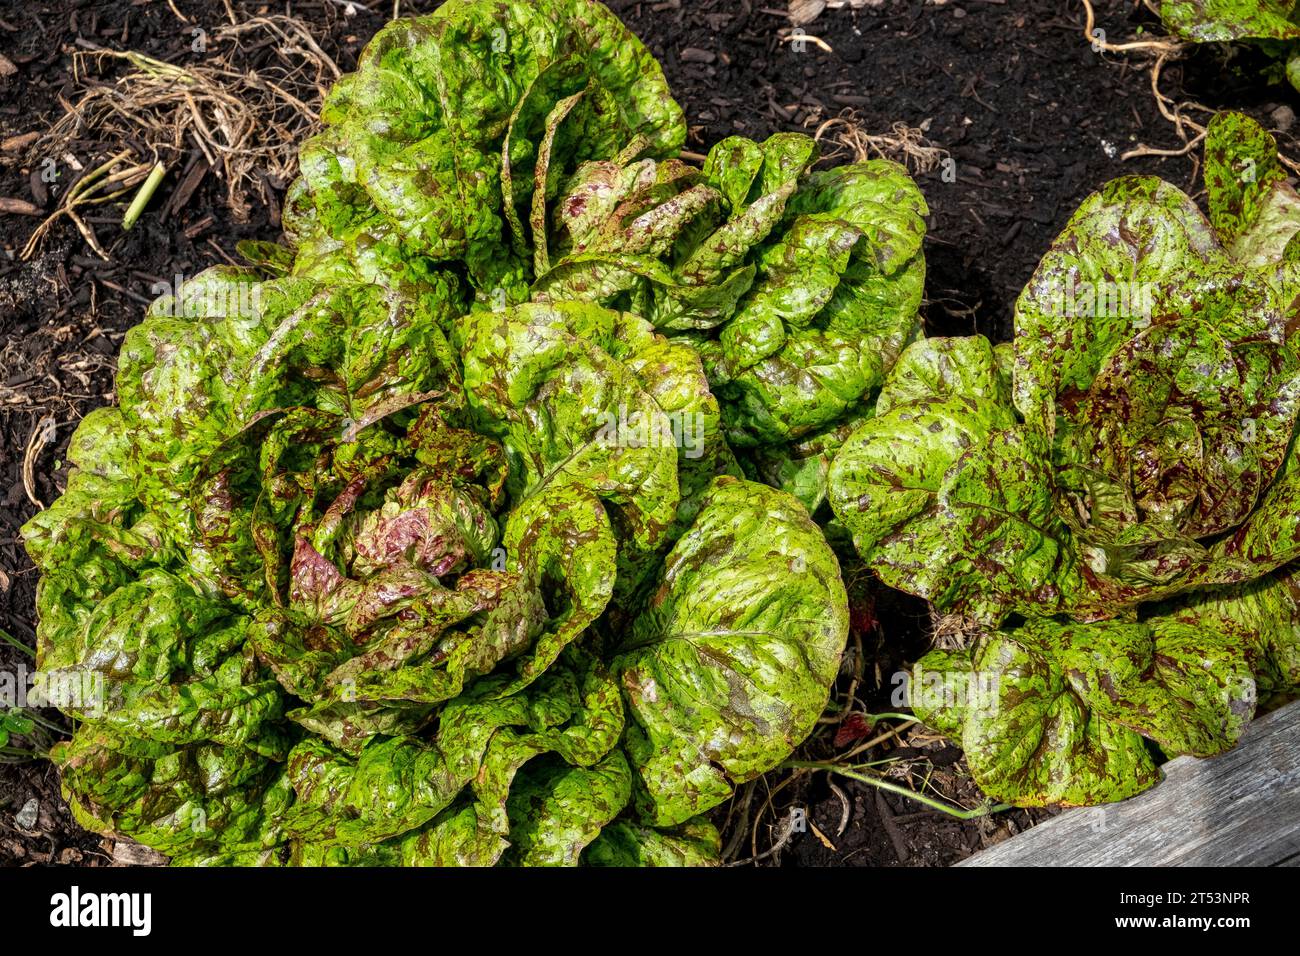 Speckled lettuce of the variety known as Flashy Troutback, a romaine lettuce with wine coloured speckles Stock Photo